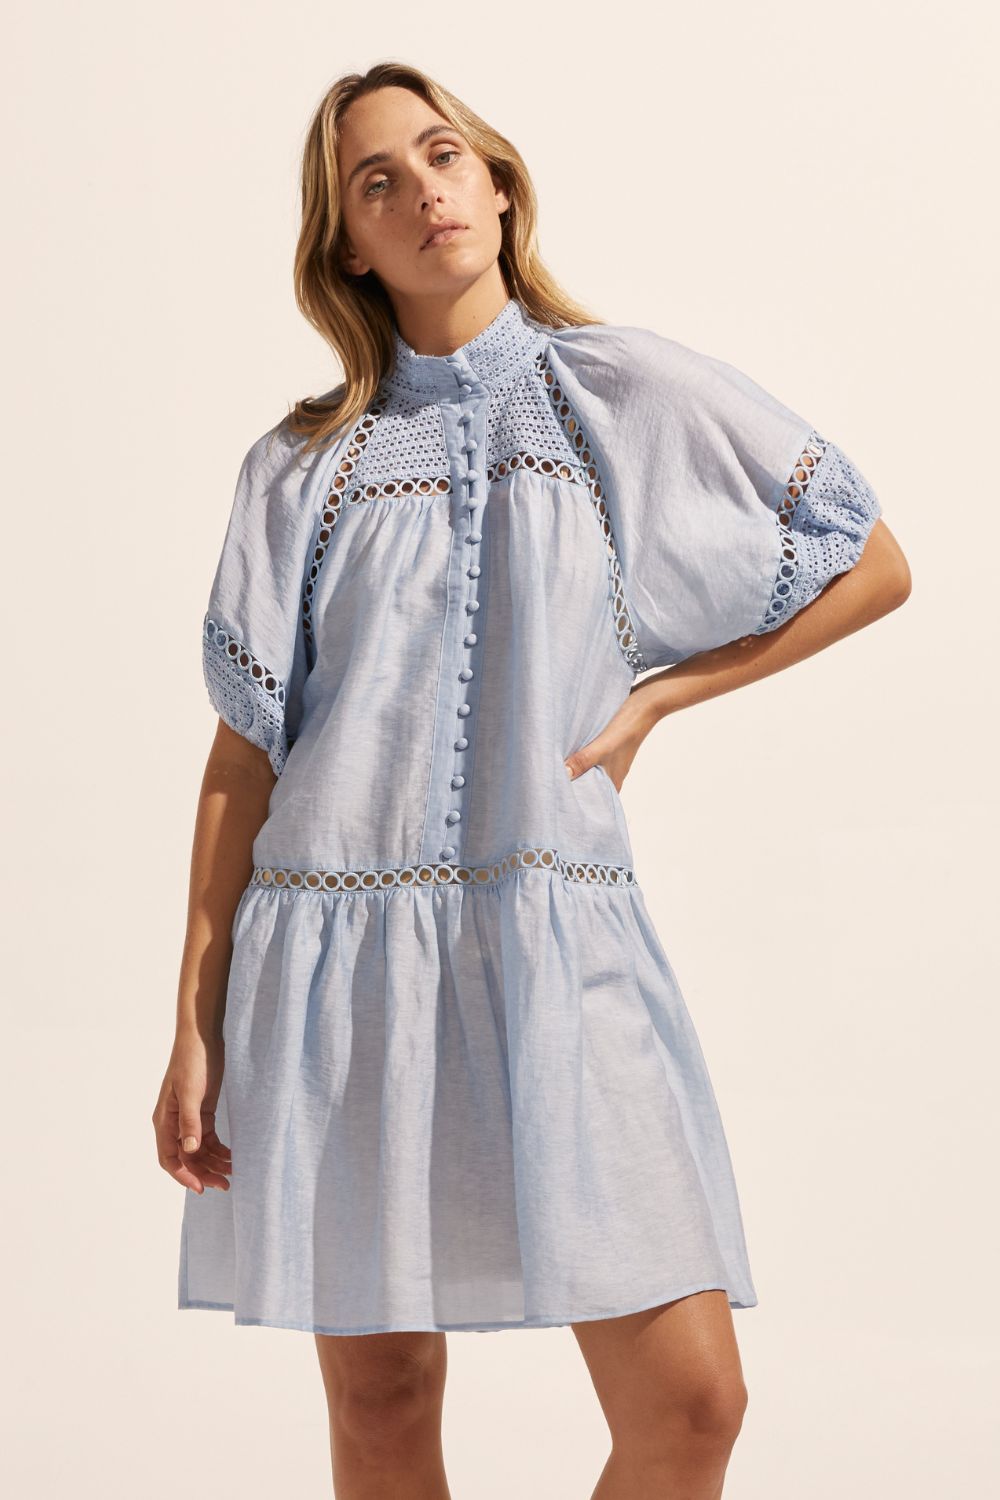 blue, high neck, covered buttons, circular lace detailing, drop waist, mid-length sleeve, mini dress, front image